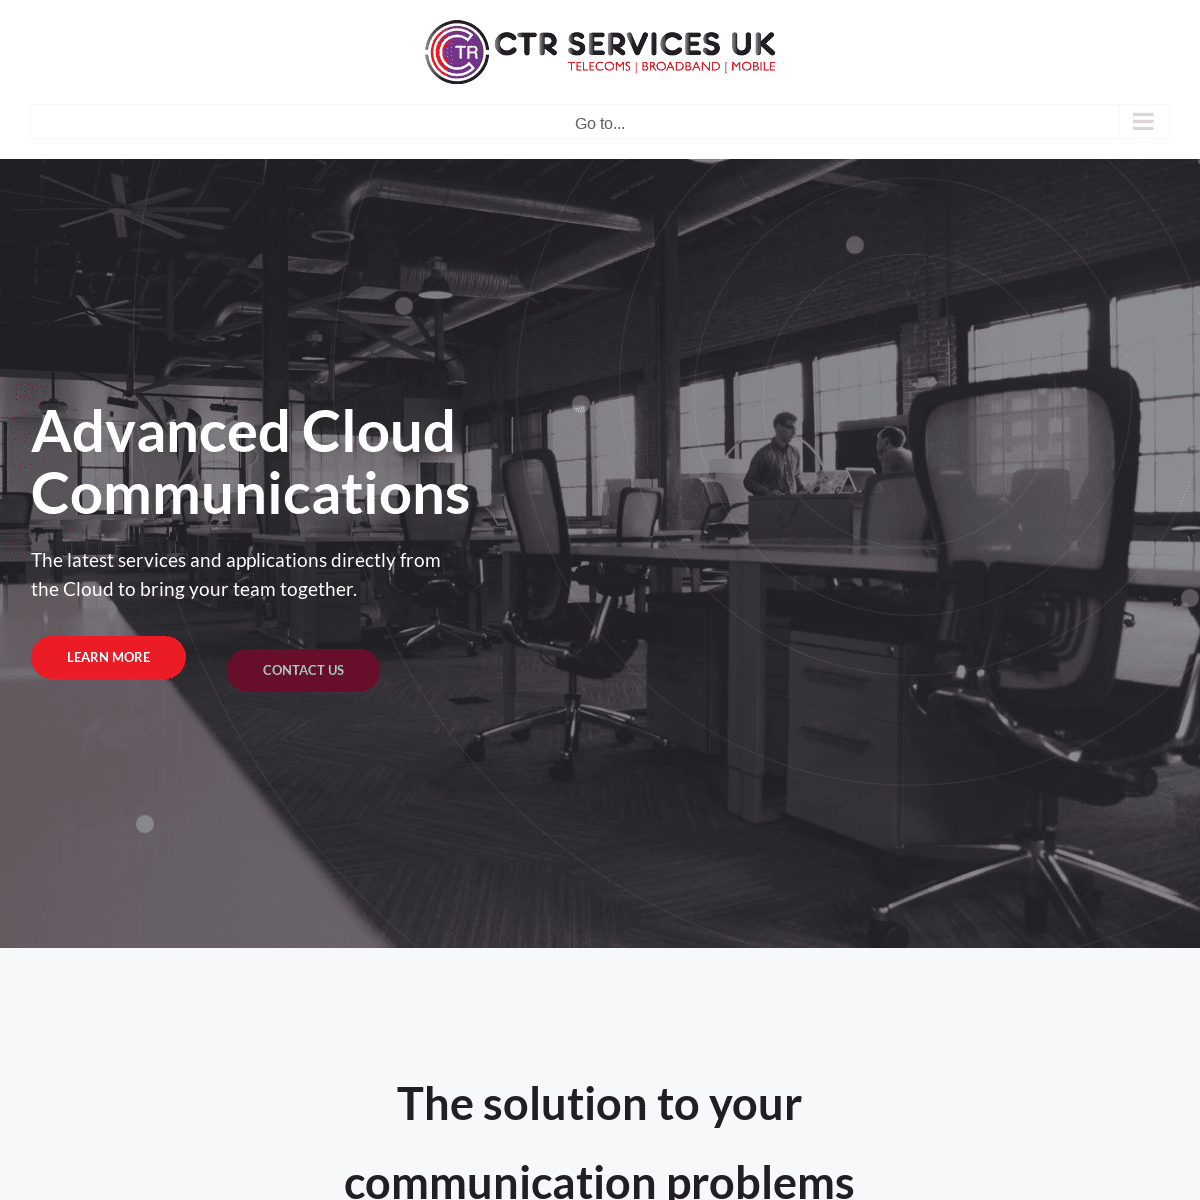 CTR Services UK – The No.1 solution to your communication problems